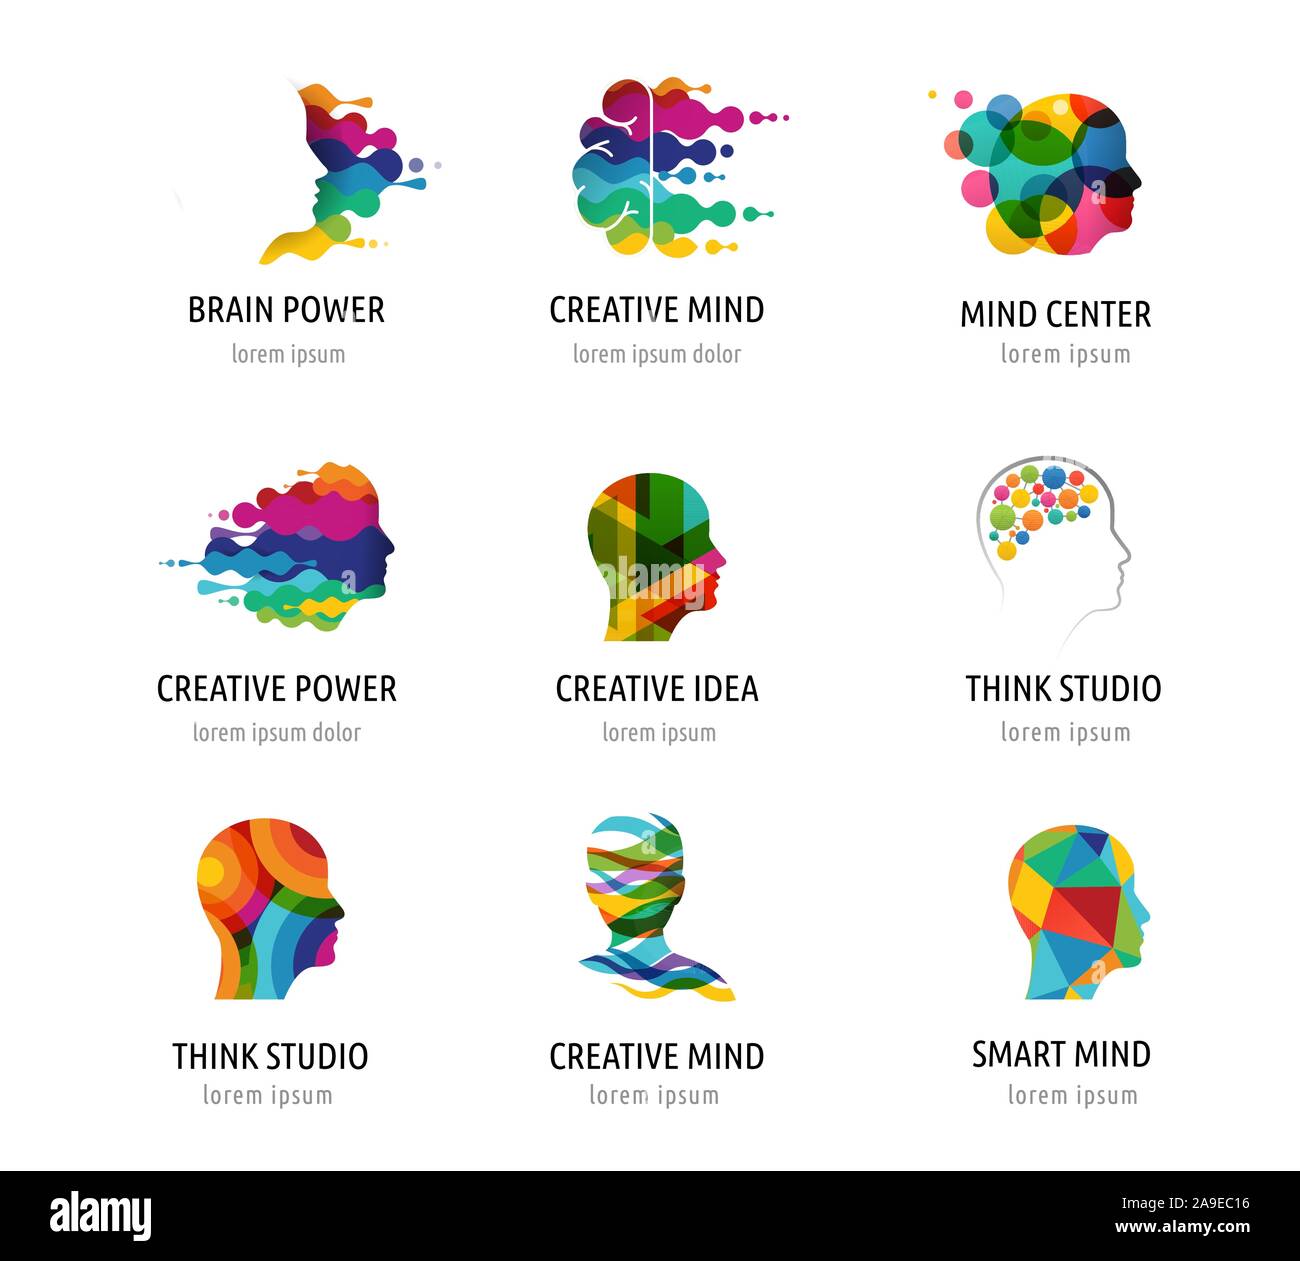 Brain, Creative mind, learning and design icons, logos. Man head, people symbols Stock Vector